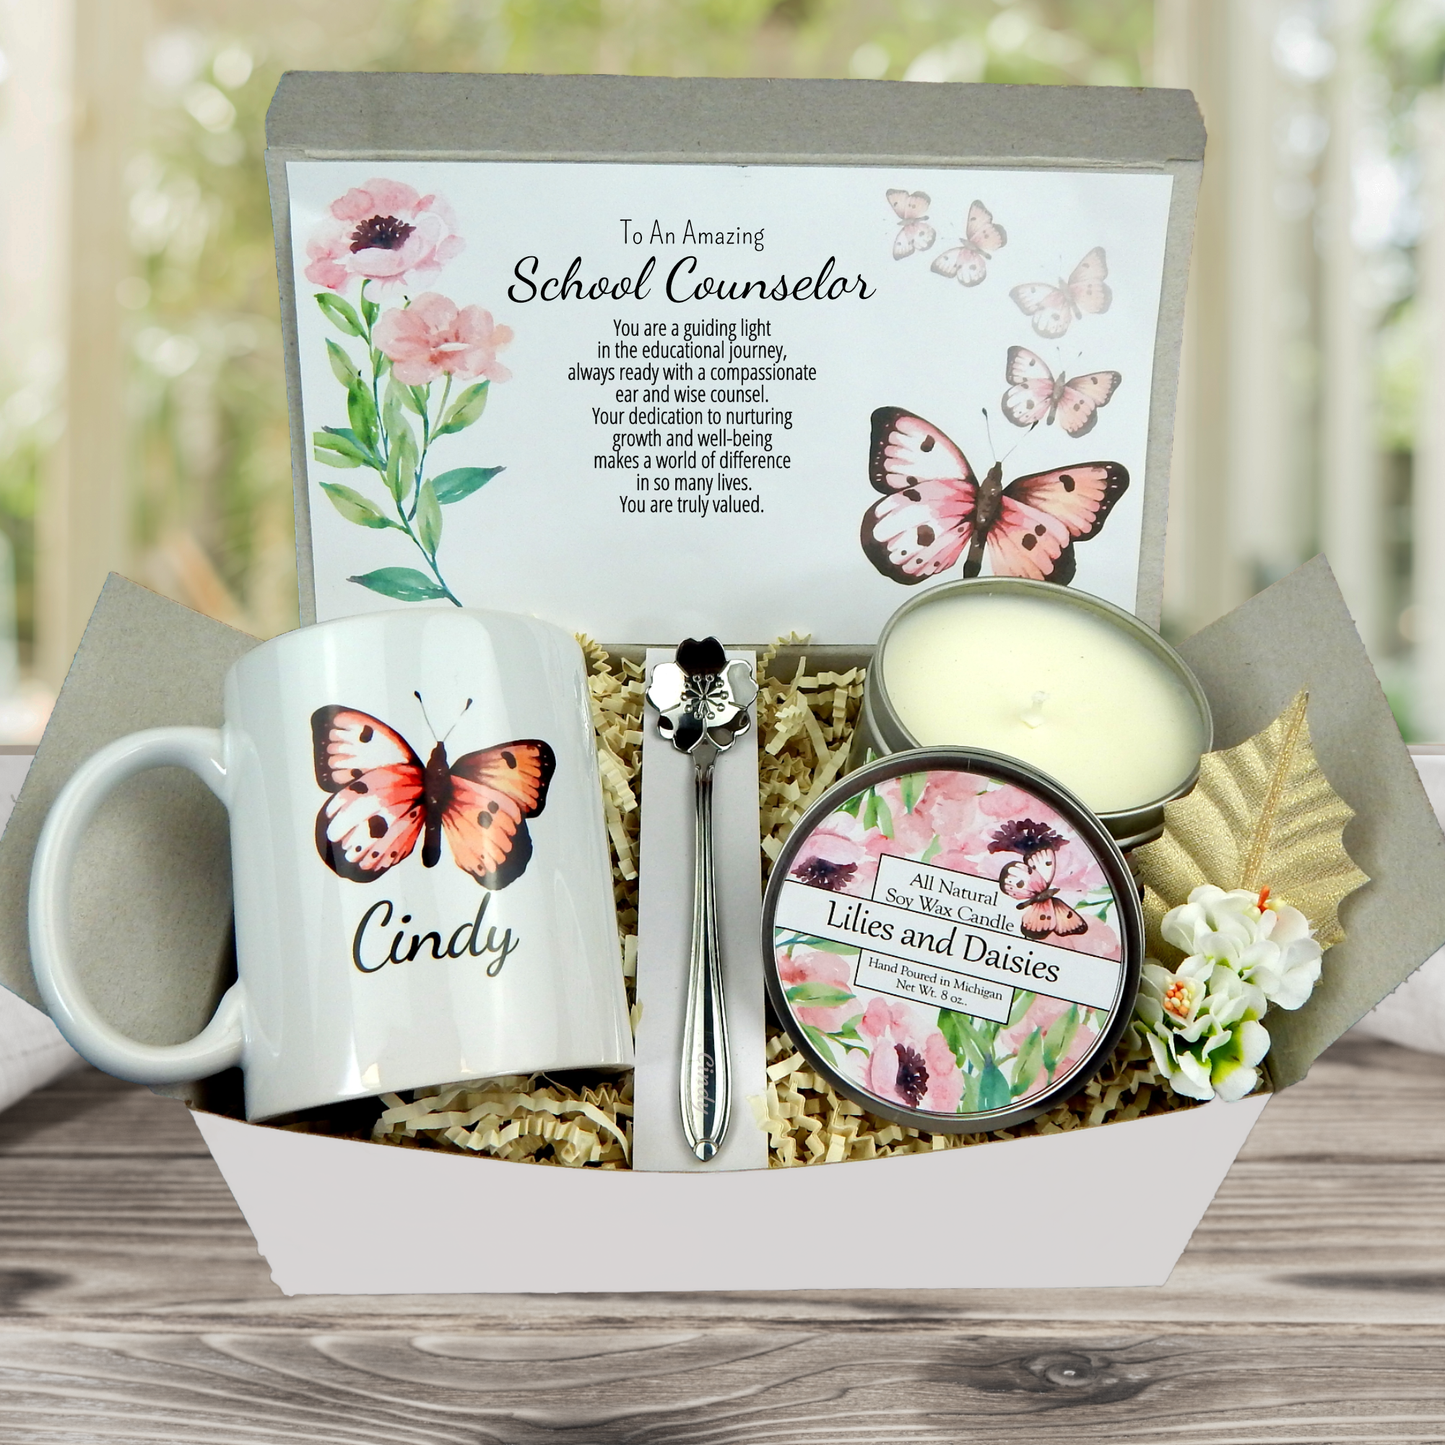 School Guidance Counselor Gift with Meaningful Message and Personalized